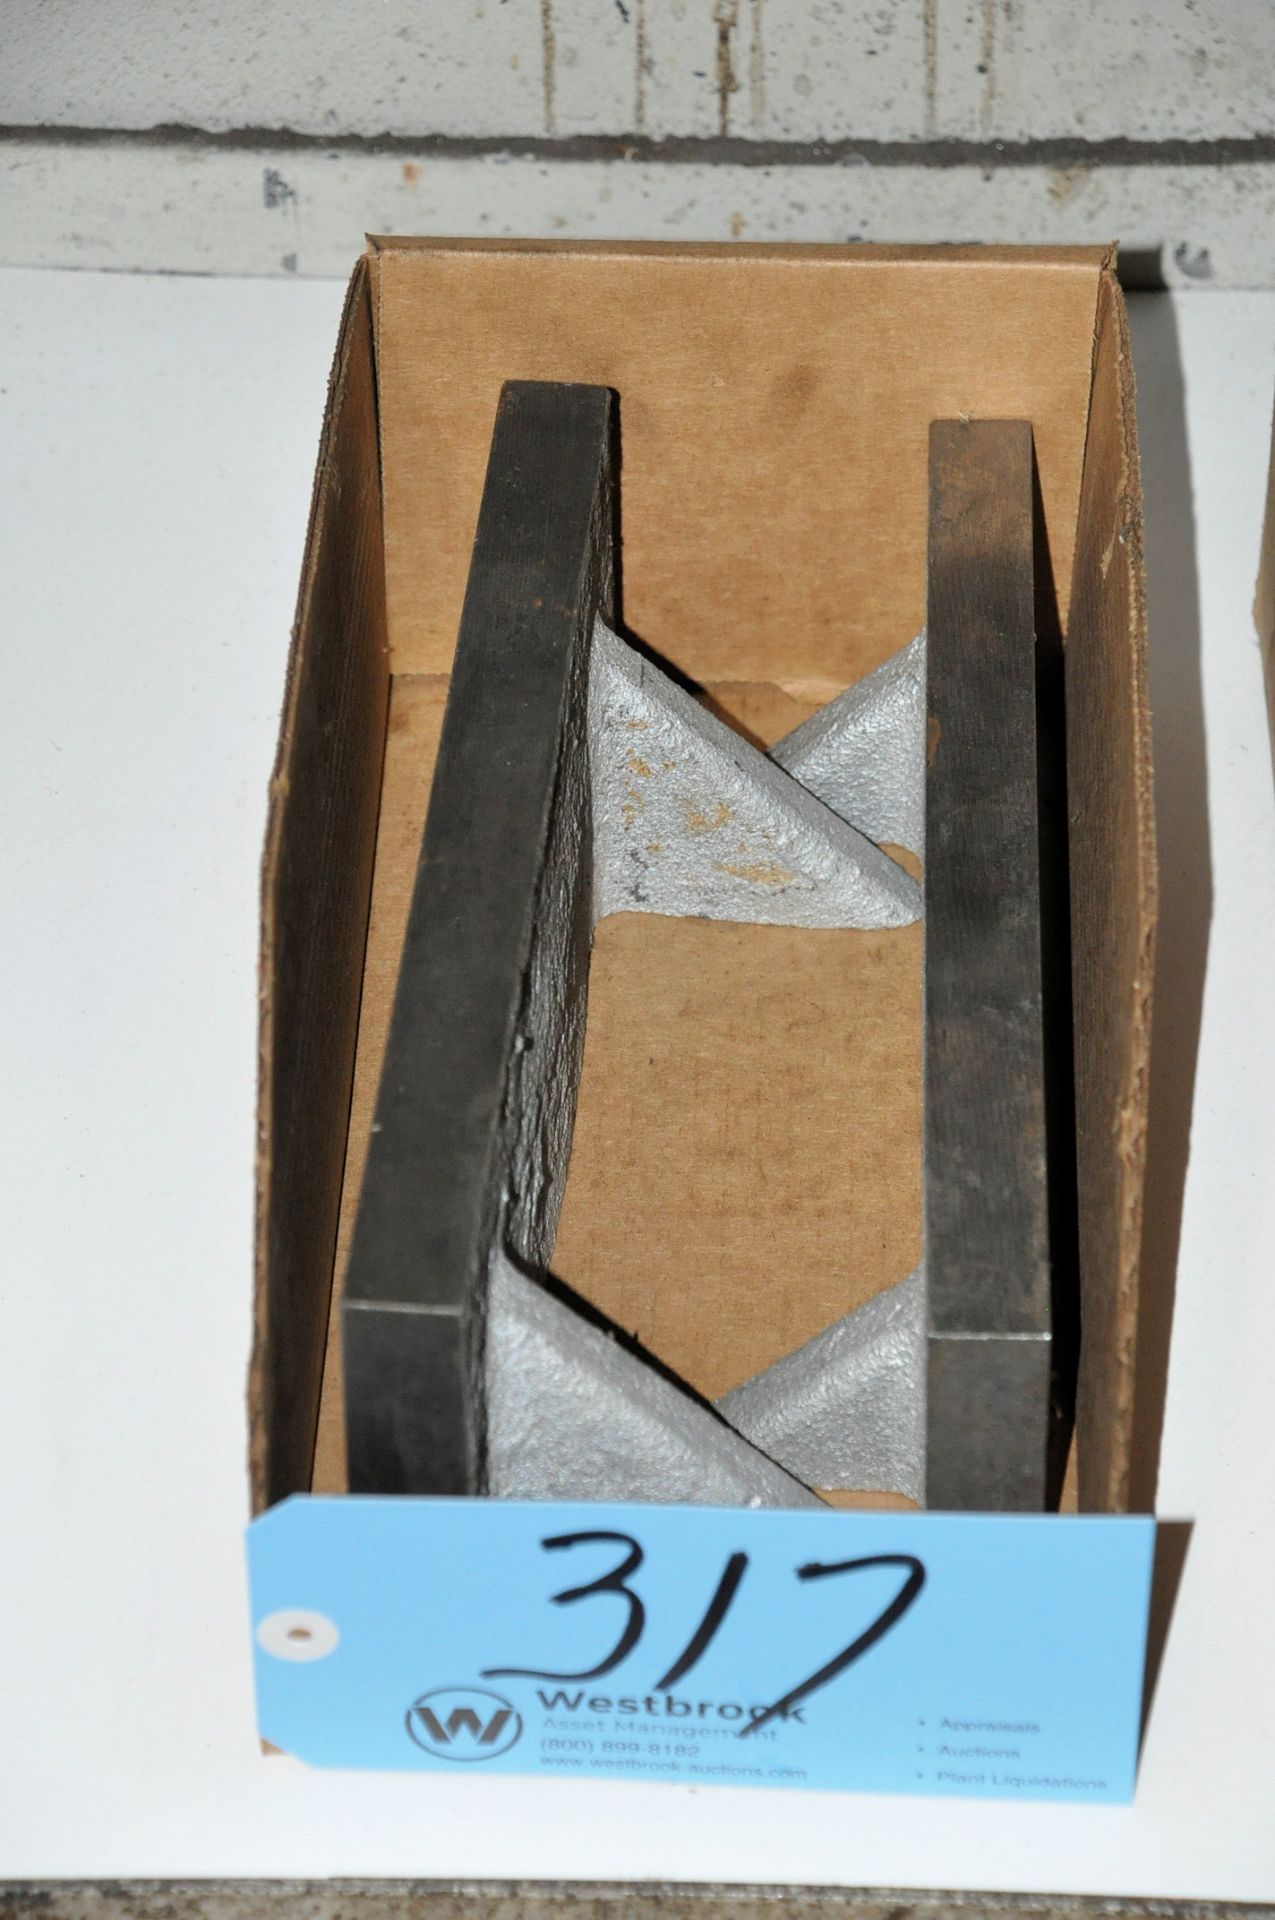 Pair 4" x 4" x 10" Angle Plates in (1) Box on Lower Shelf